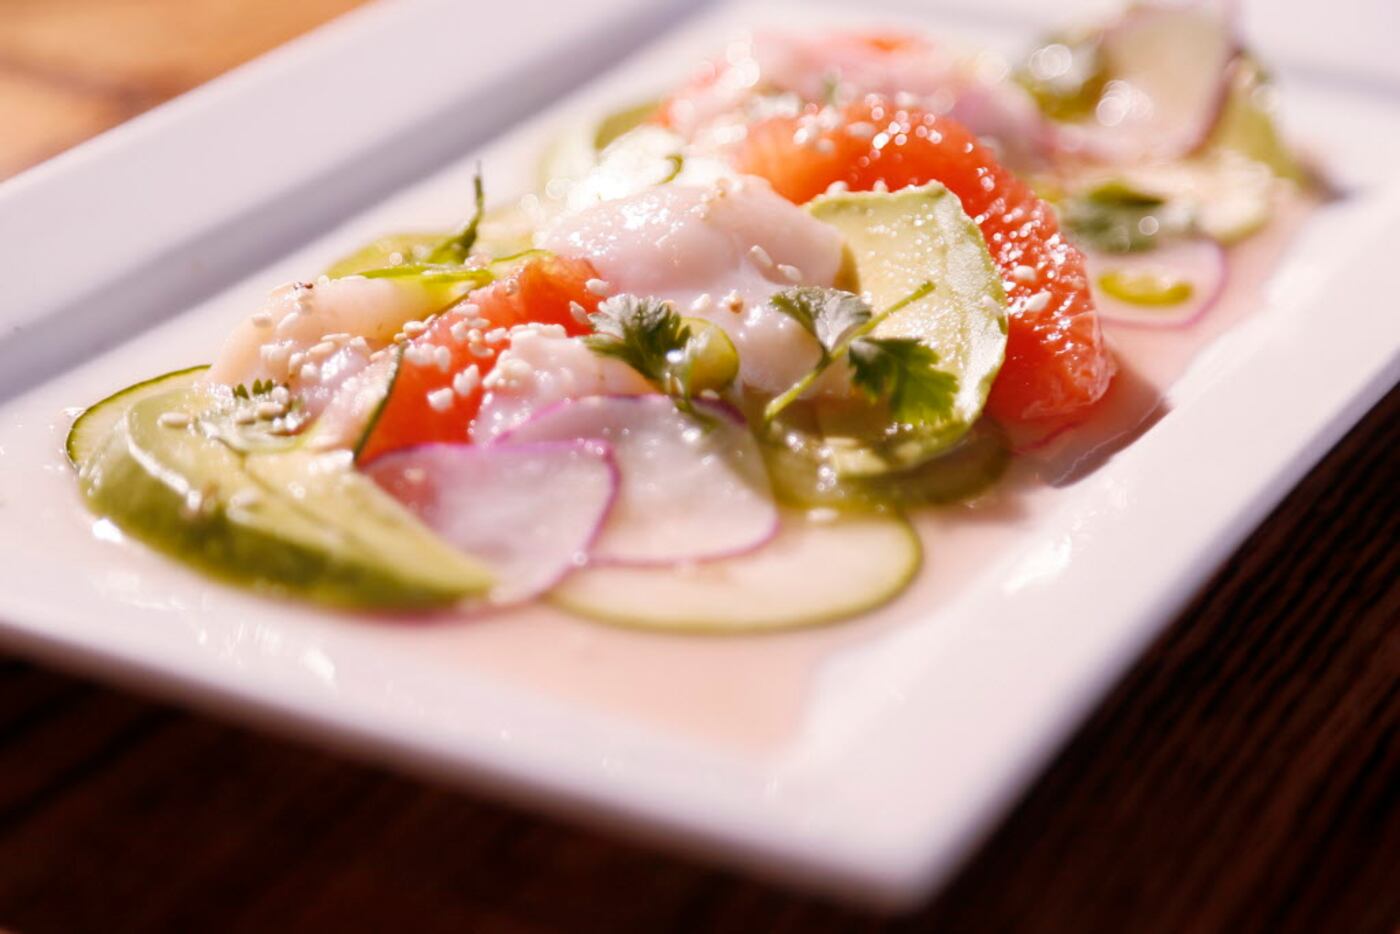 Scallop carpaccio with cucumber, pink grapefruit and radishes